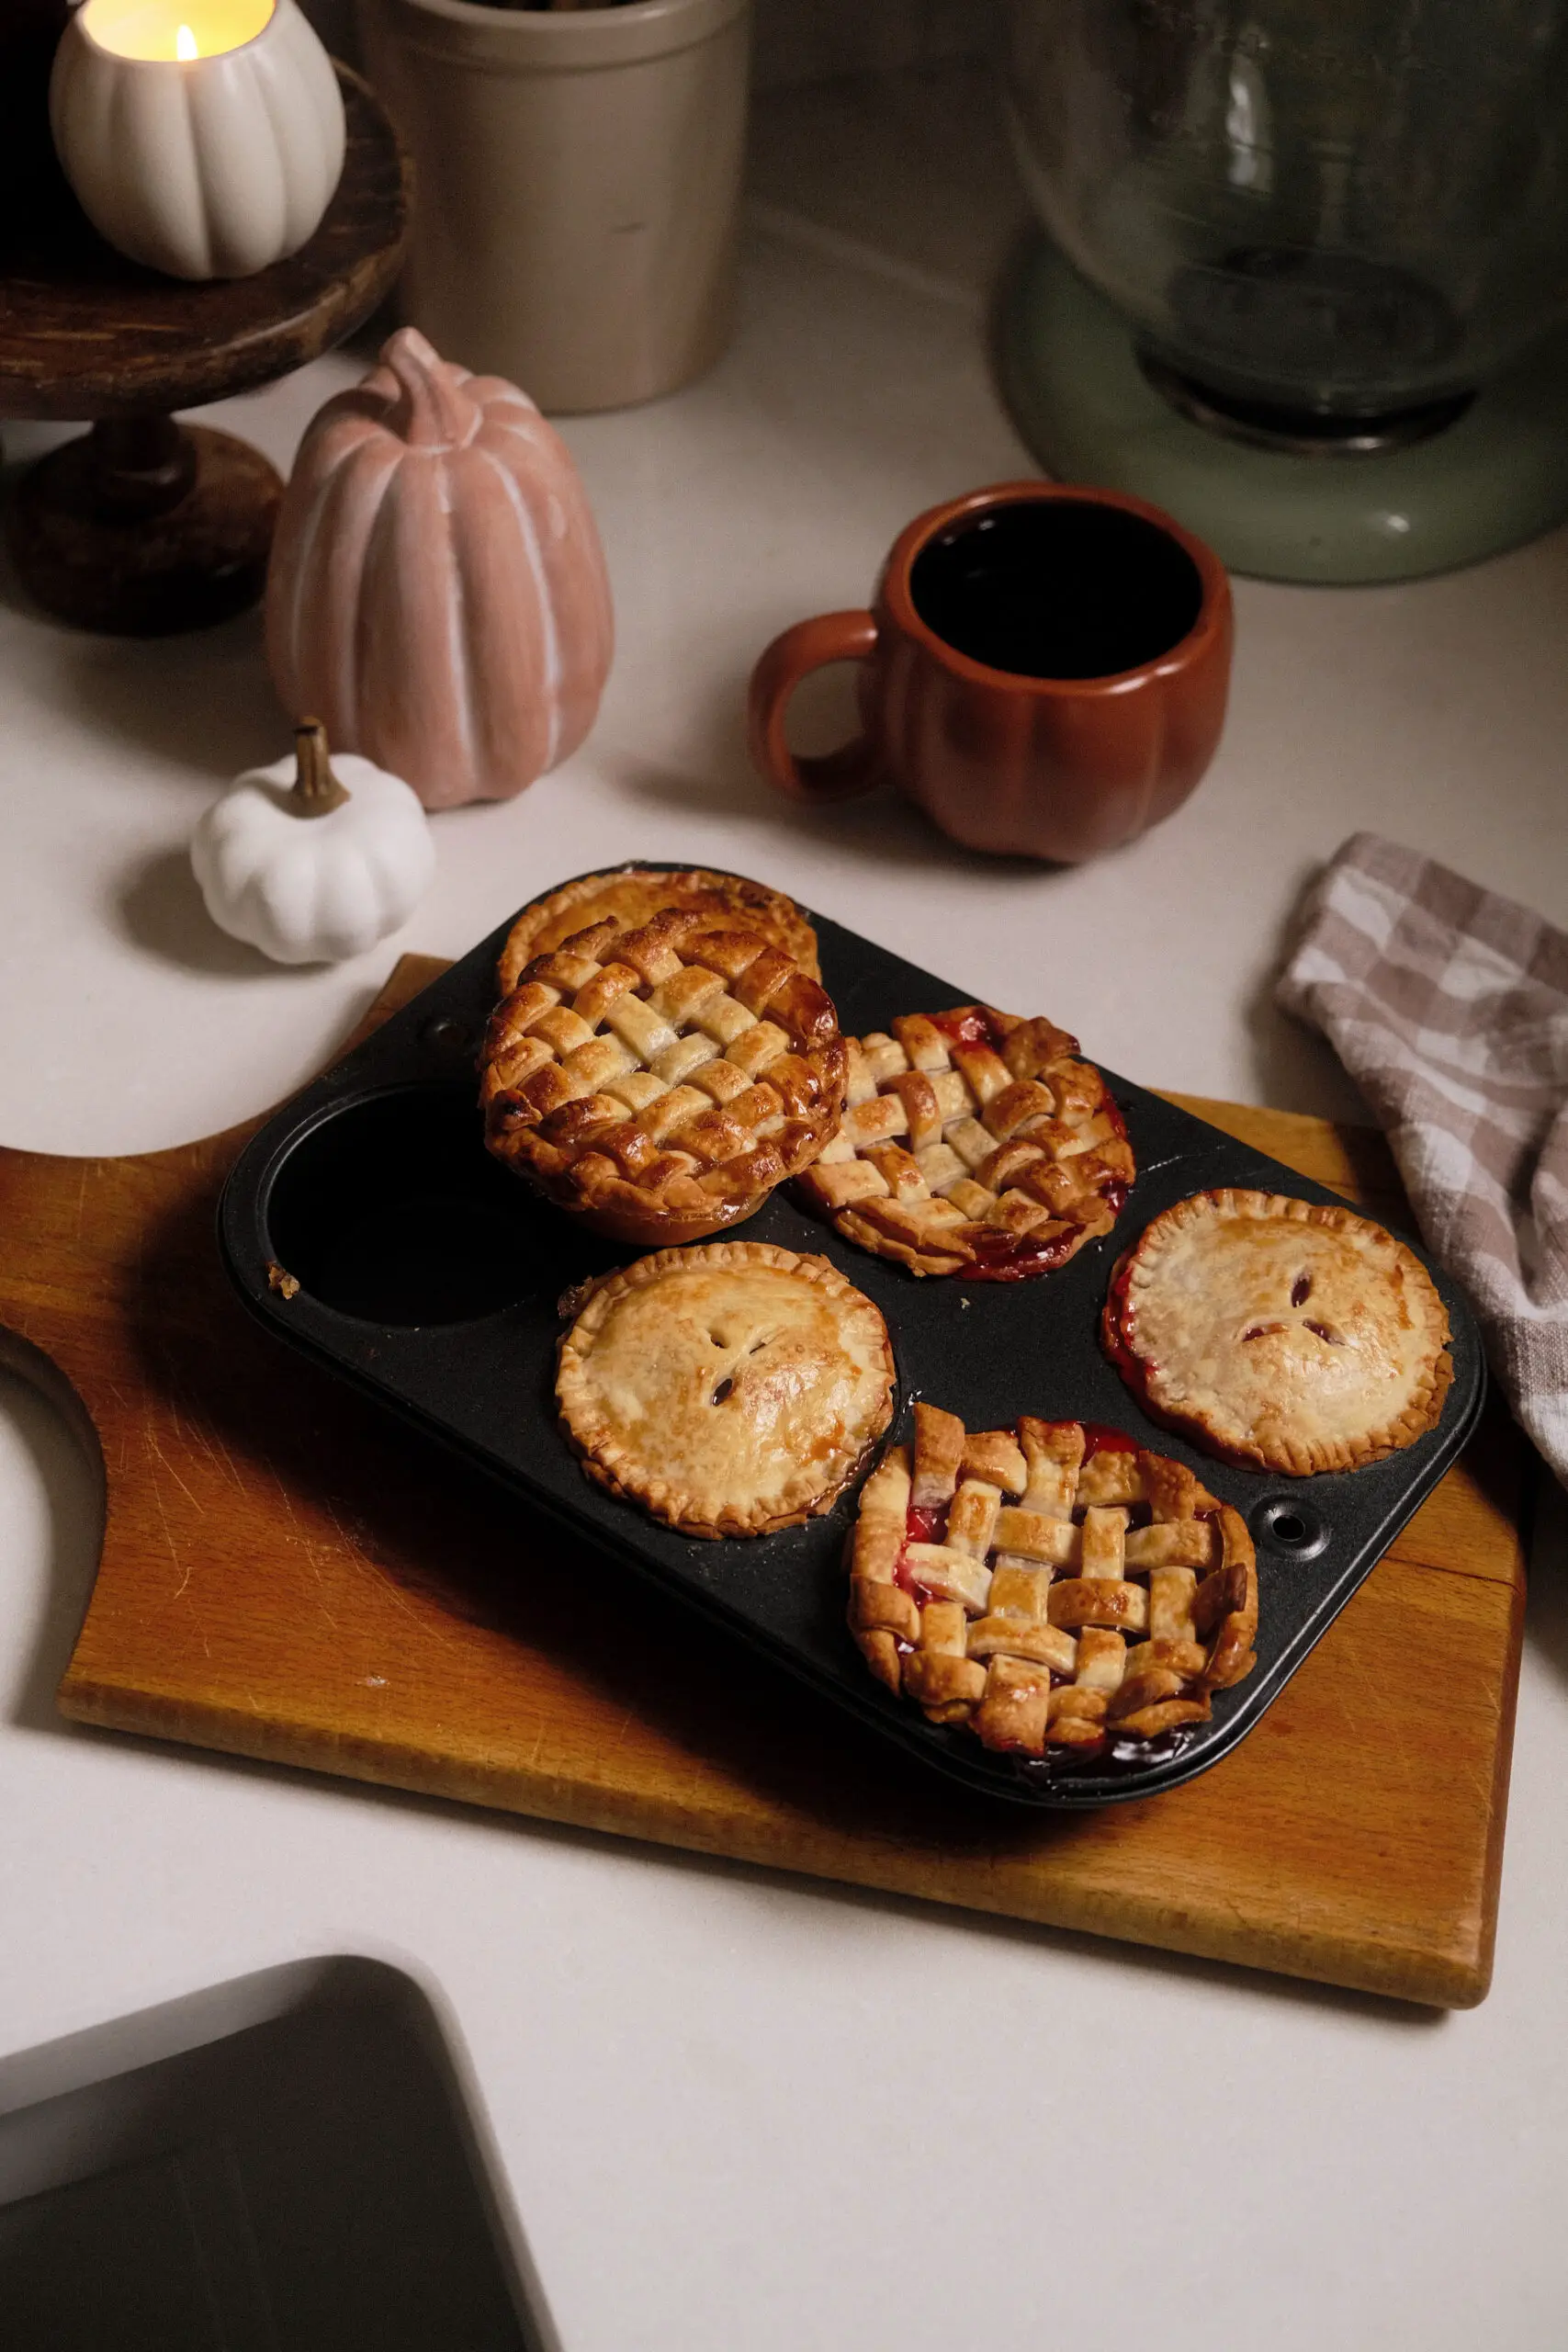 https://josiemichelledavis.com/wp-content/uploads/2023/09/How-to-make-individual-pies-in-a-cupcake-pan-scaled.jpg